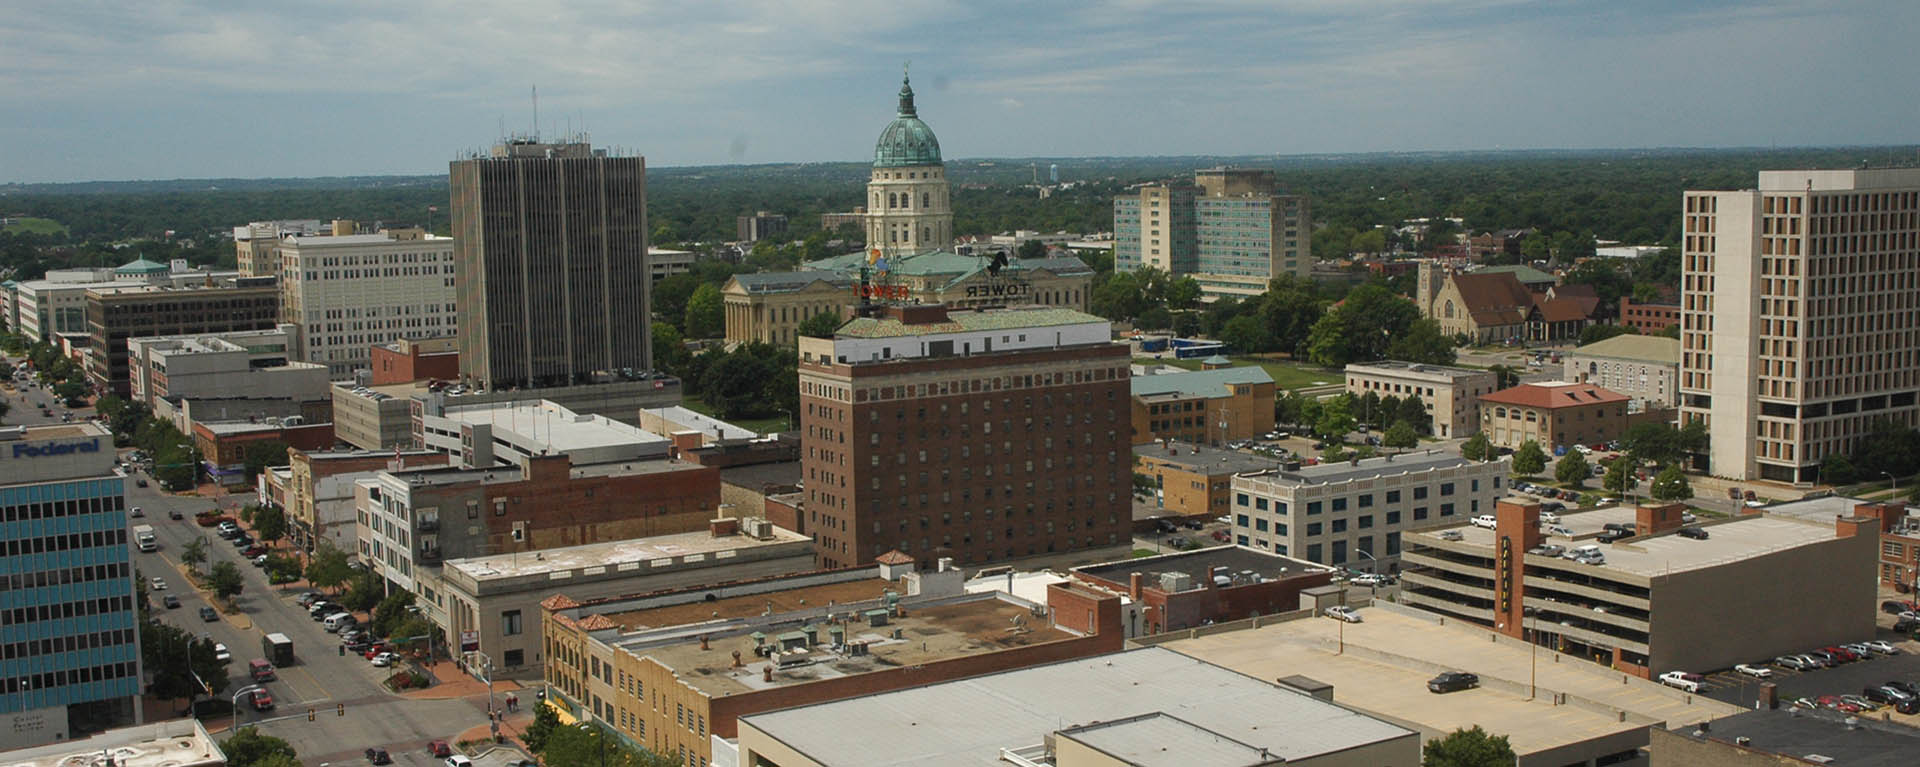 Topeka as seen from the Jayhawk Tower